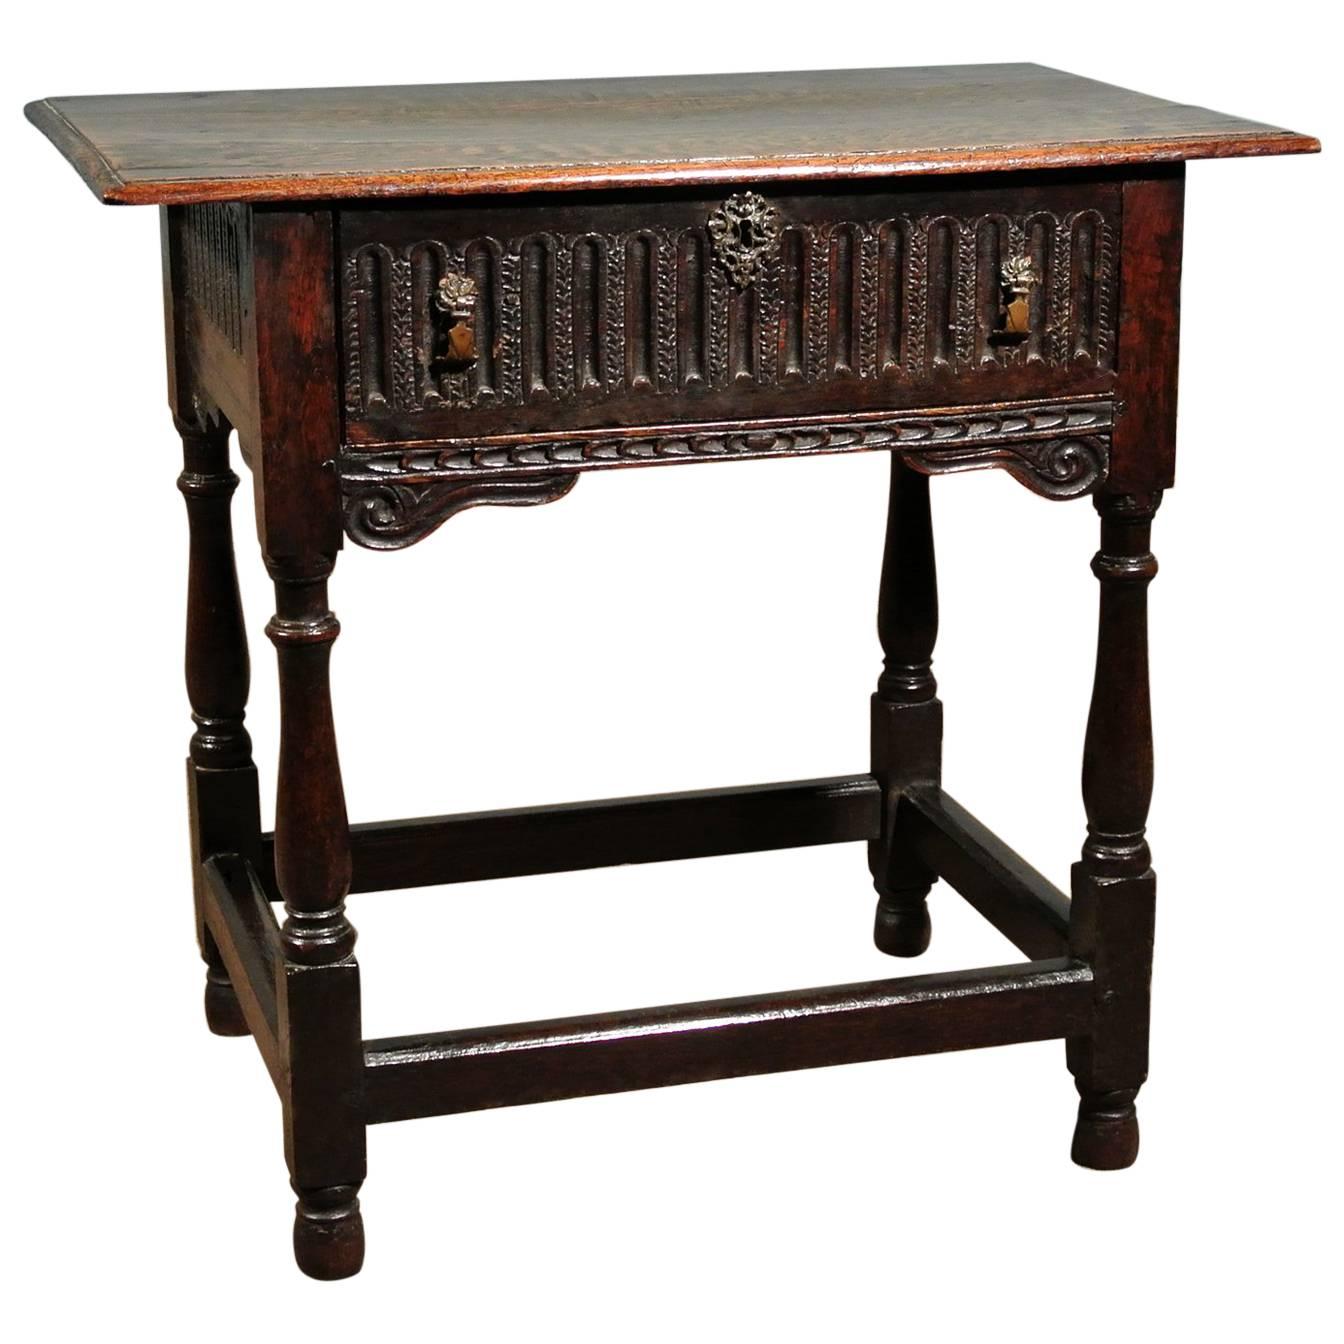 Early 17th Century Oak Lowboy with Provenance from Groombridge Place in Kent